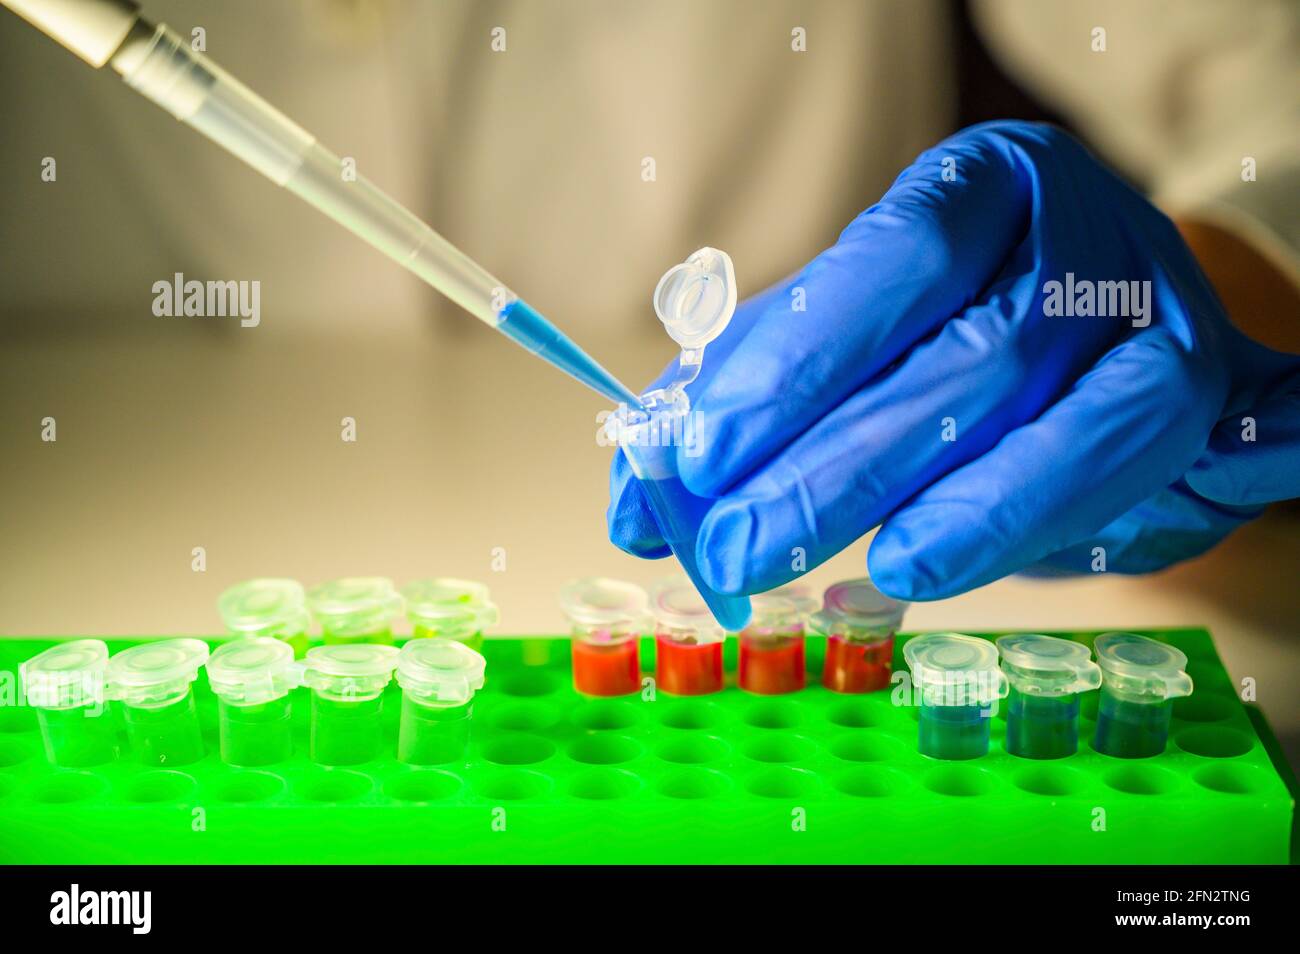 Scientist health care professional working with Corona virus patient samples in a molecular biology laboratory wearing gloves as safety measurement Stock Photo